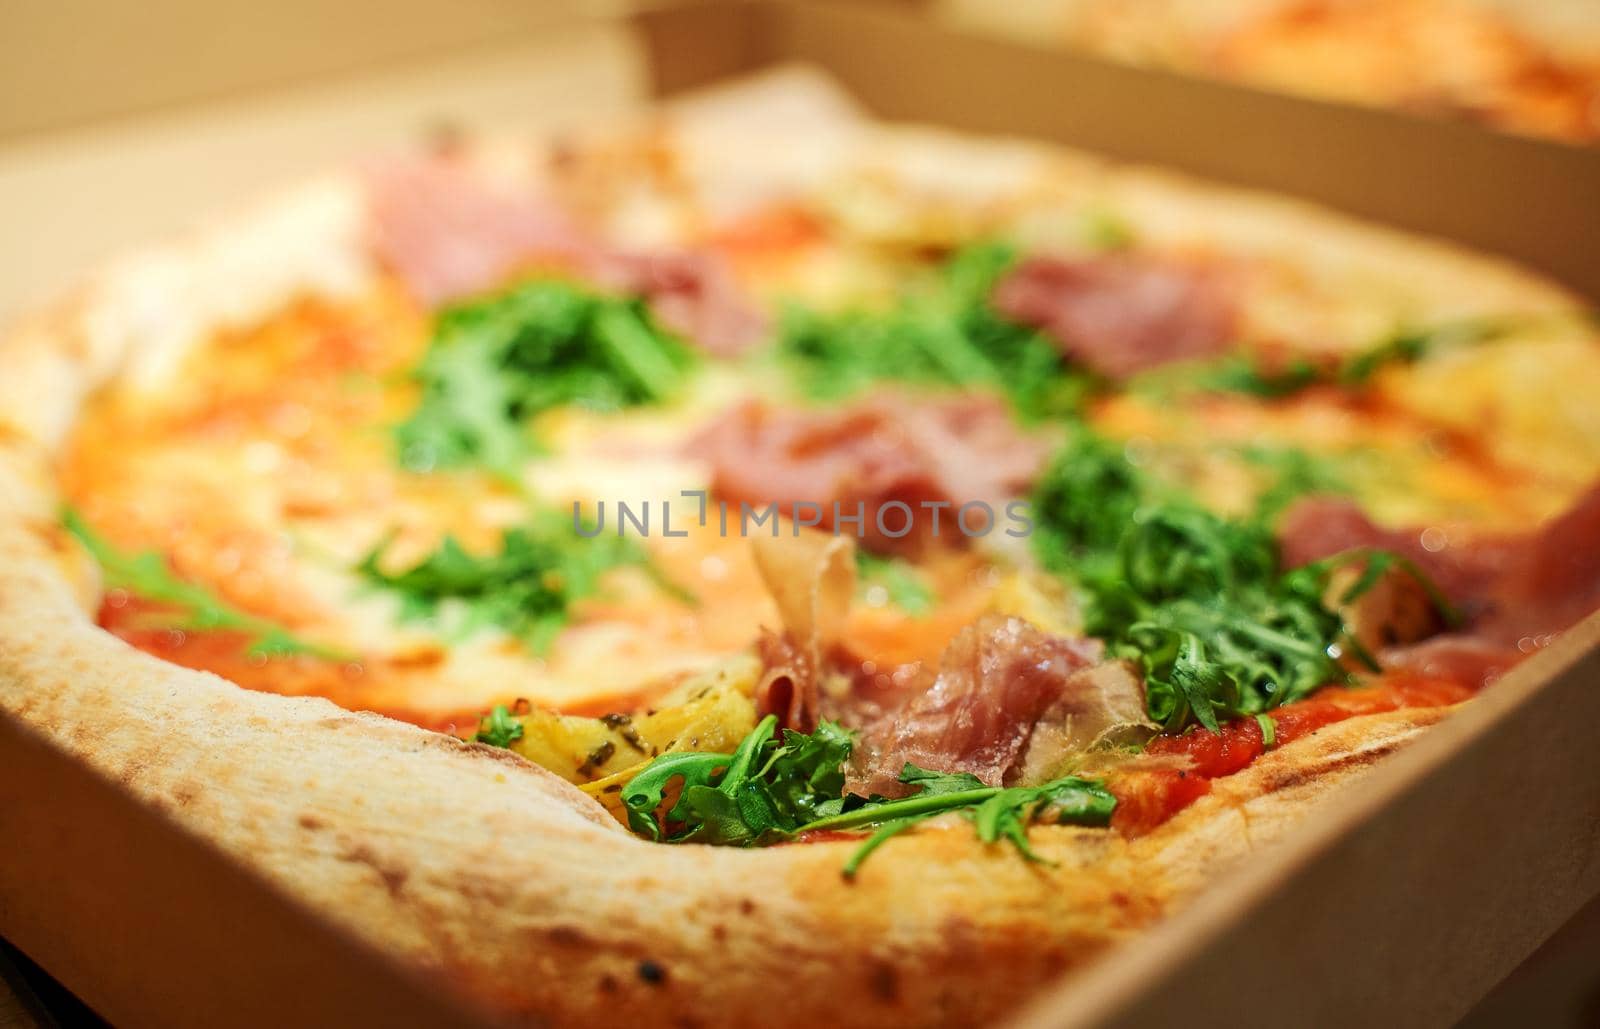 Freshly baked ordered pizza in a box. by dmitrimaruta